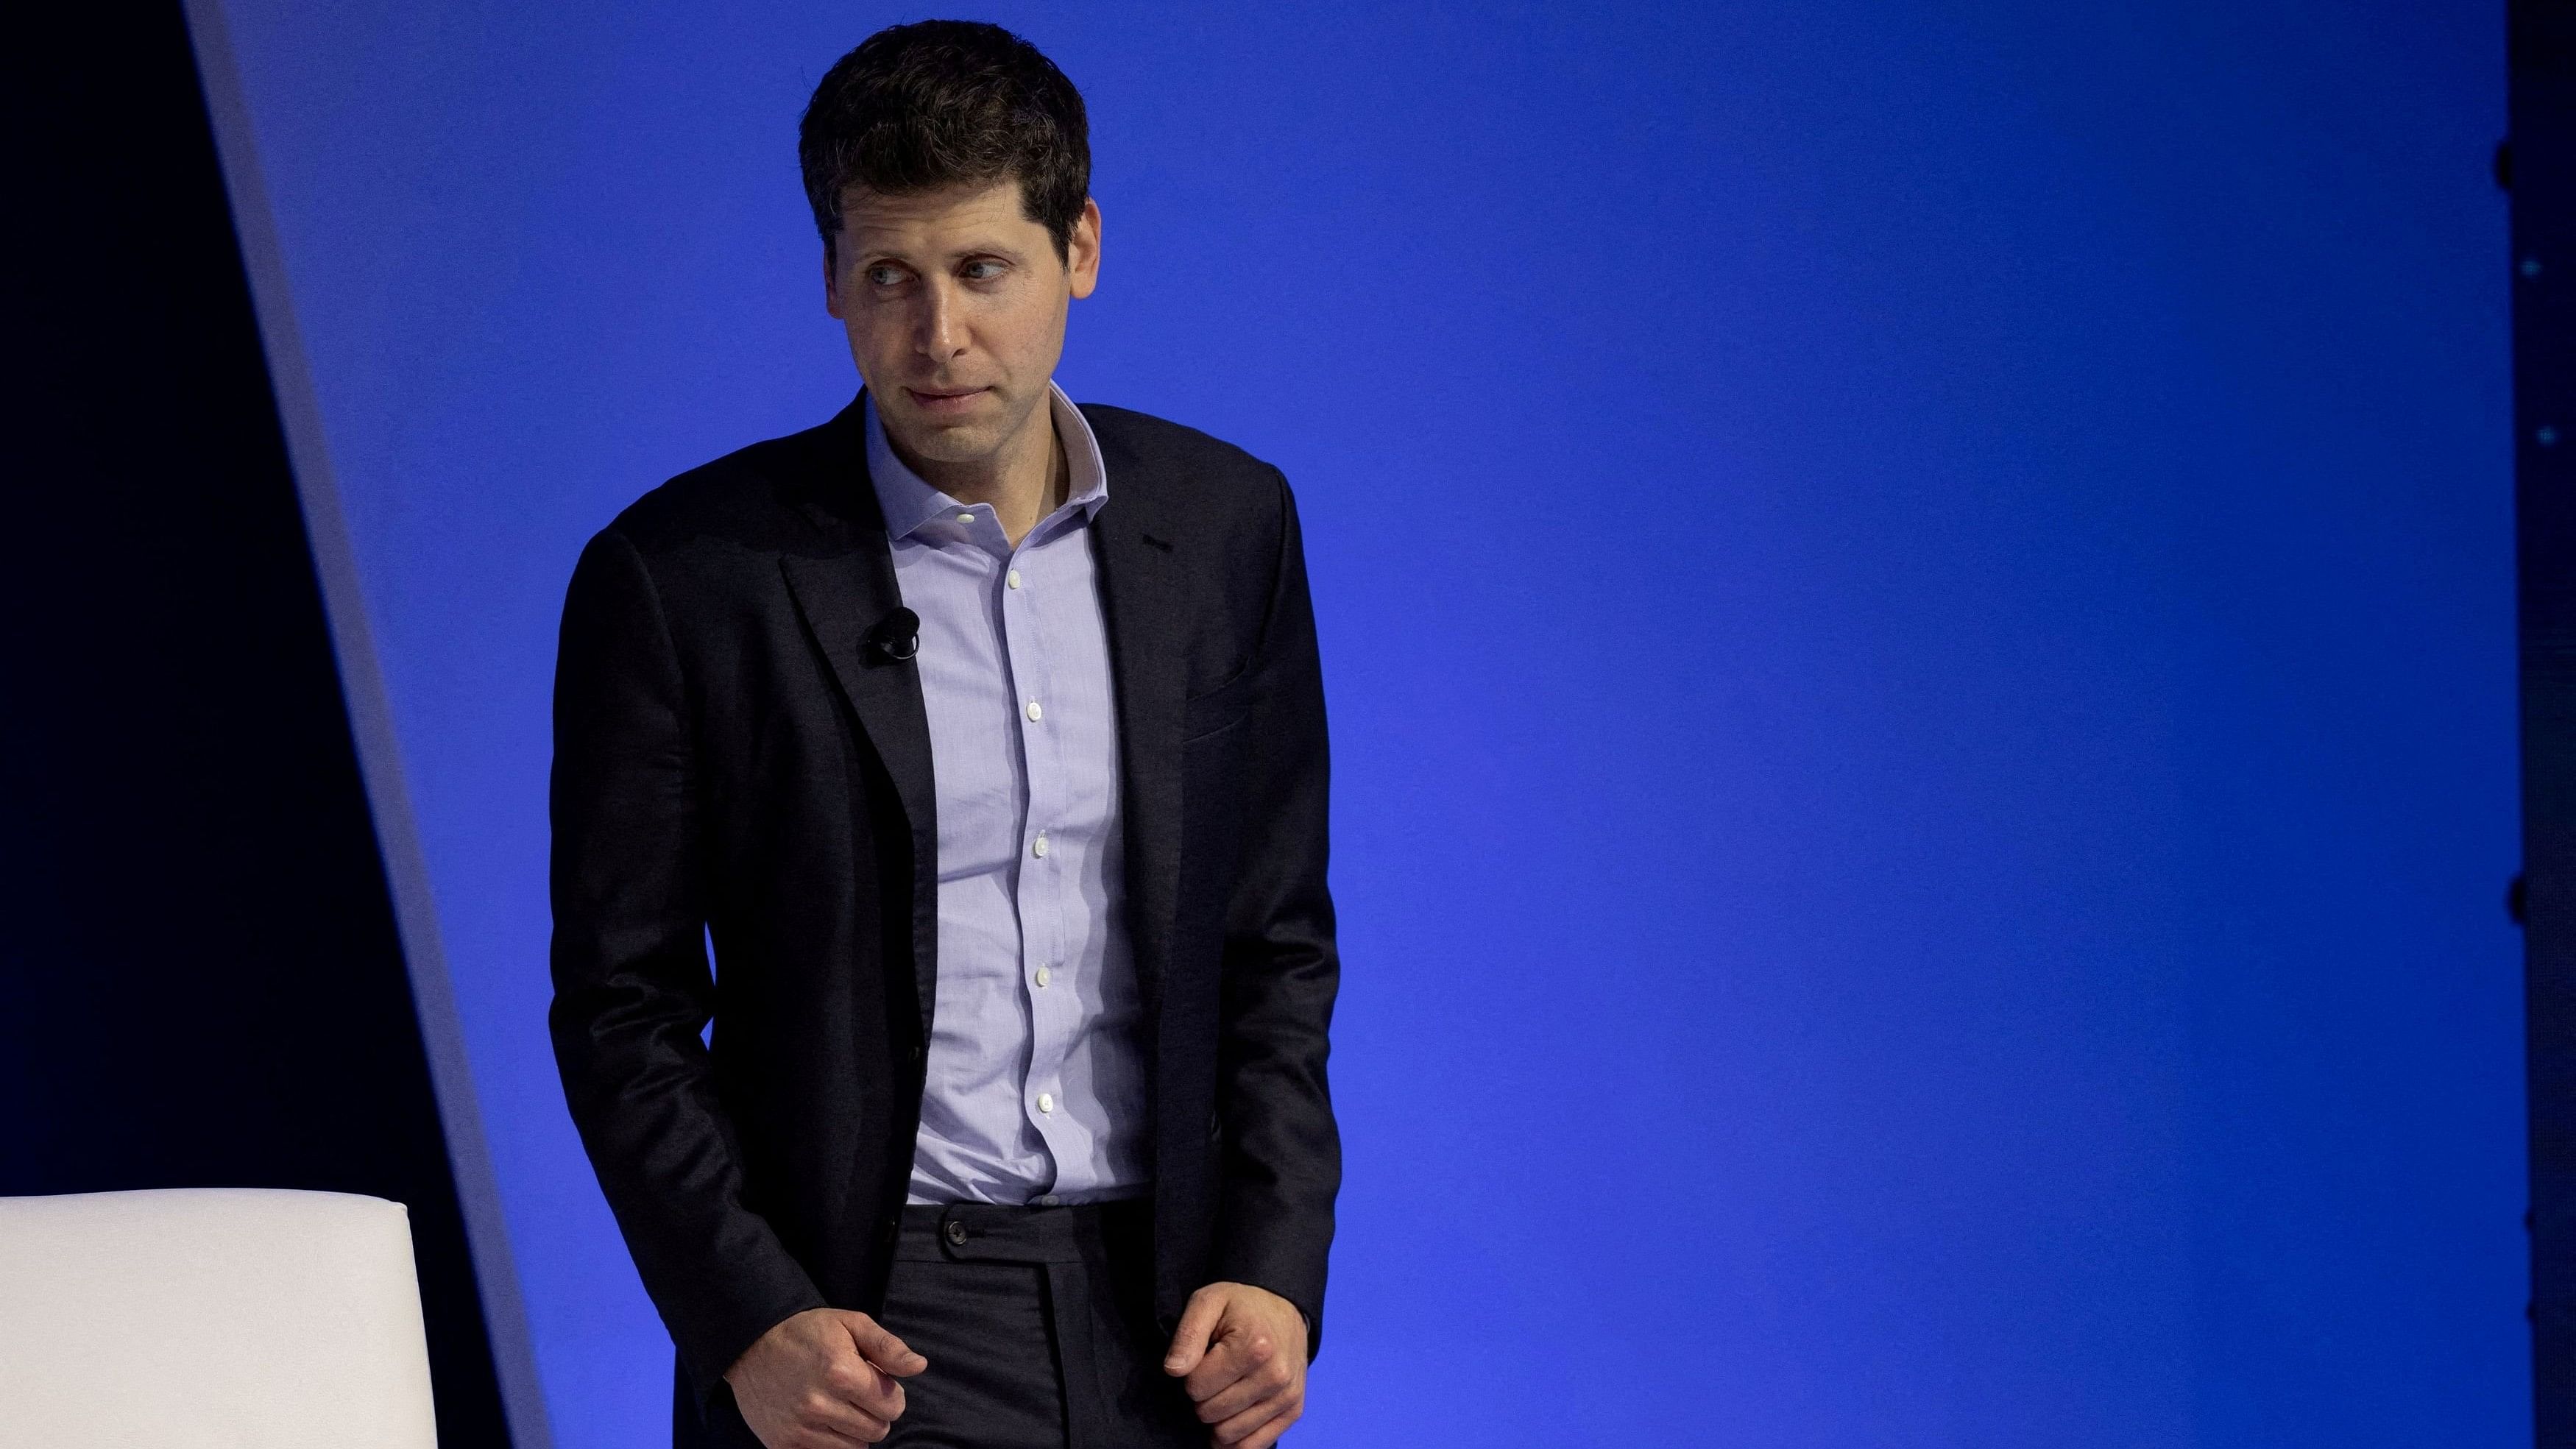 Can Sam Altman Develop AI Capable of Answering These Six Questions?